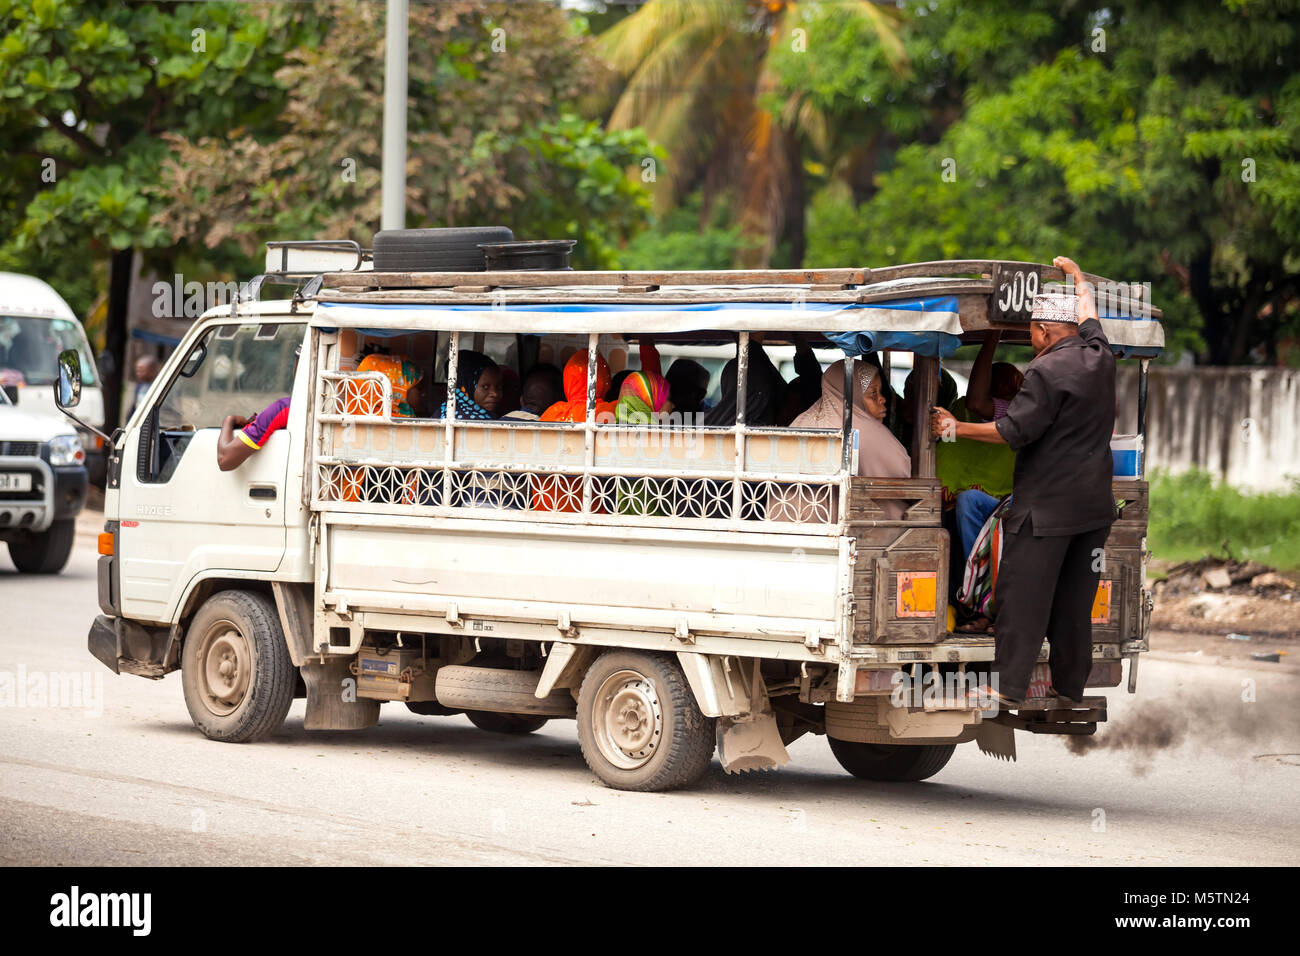 Taxi taking people to market. Man riding on back of taxi. Stock Photo